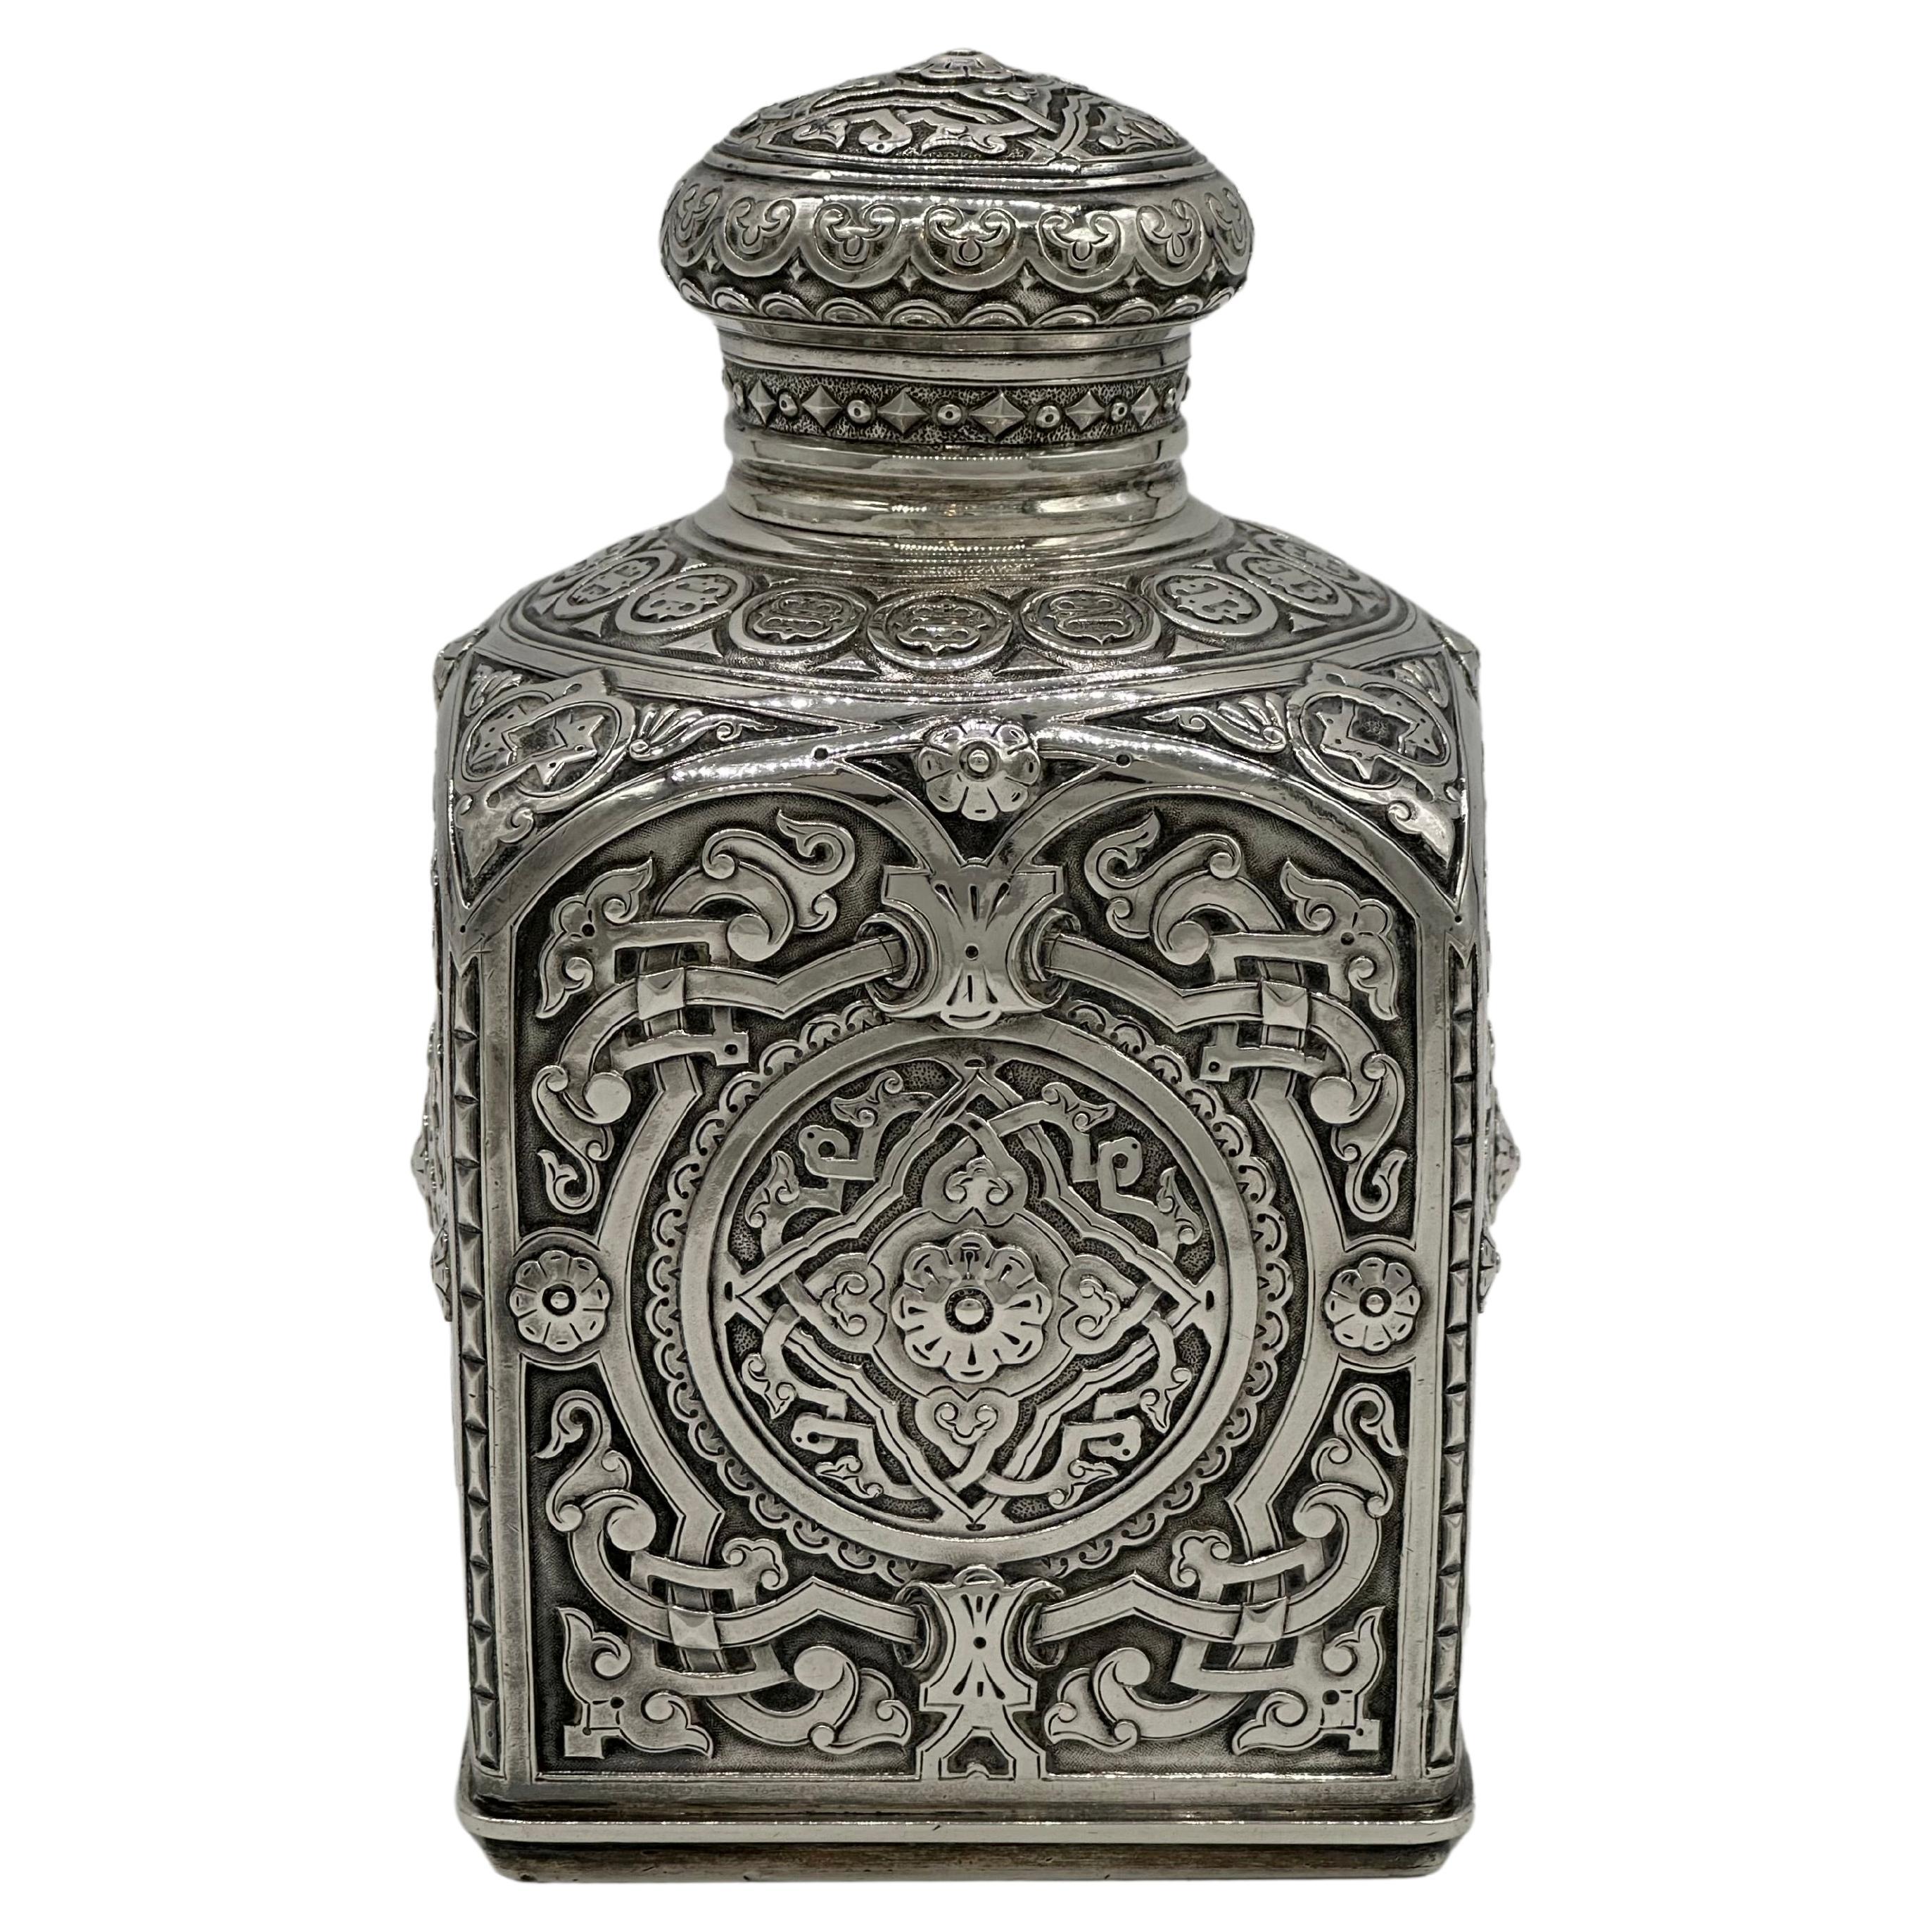 Amazing Antique Russian Imperial Silver Tea Caddy, Loskutov, Moscow 1889